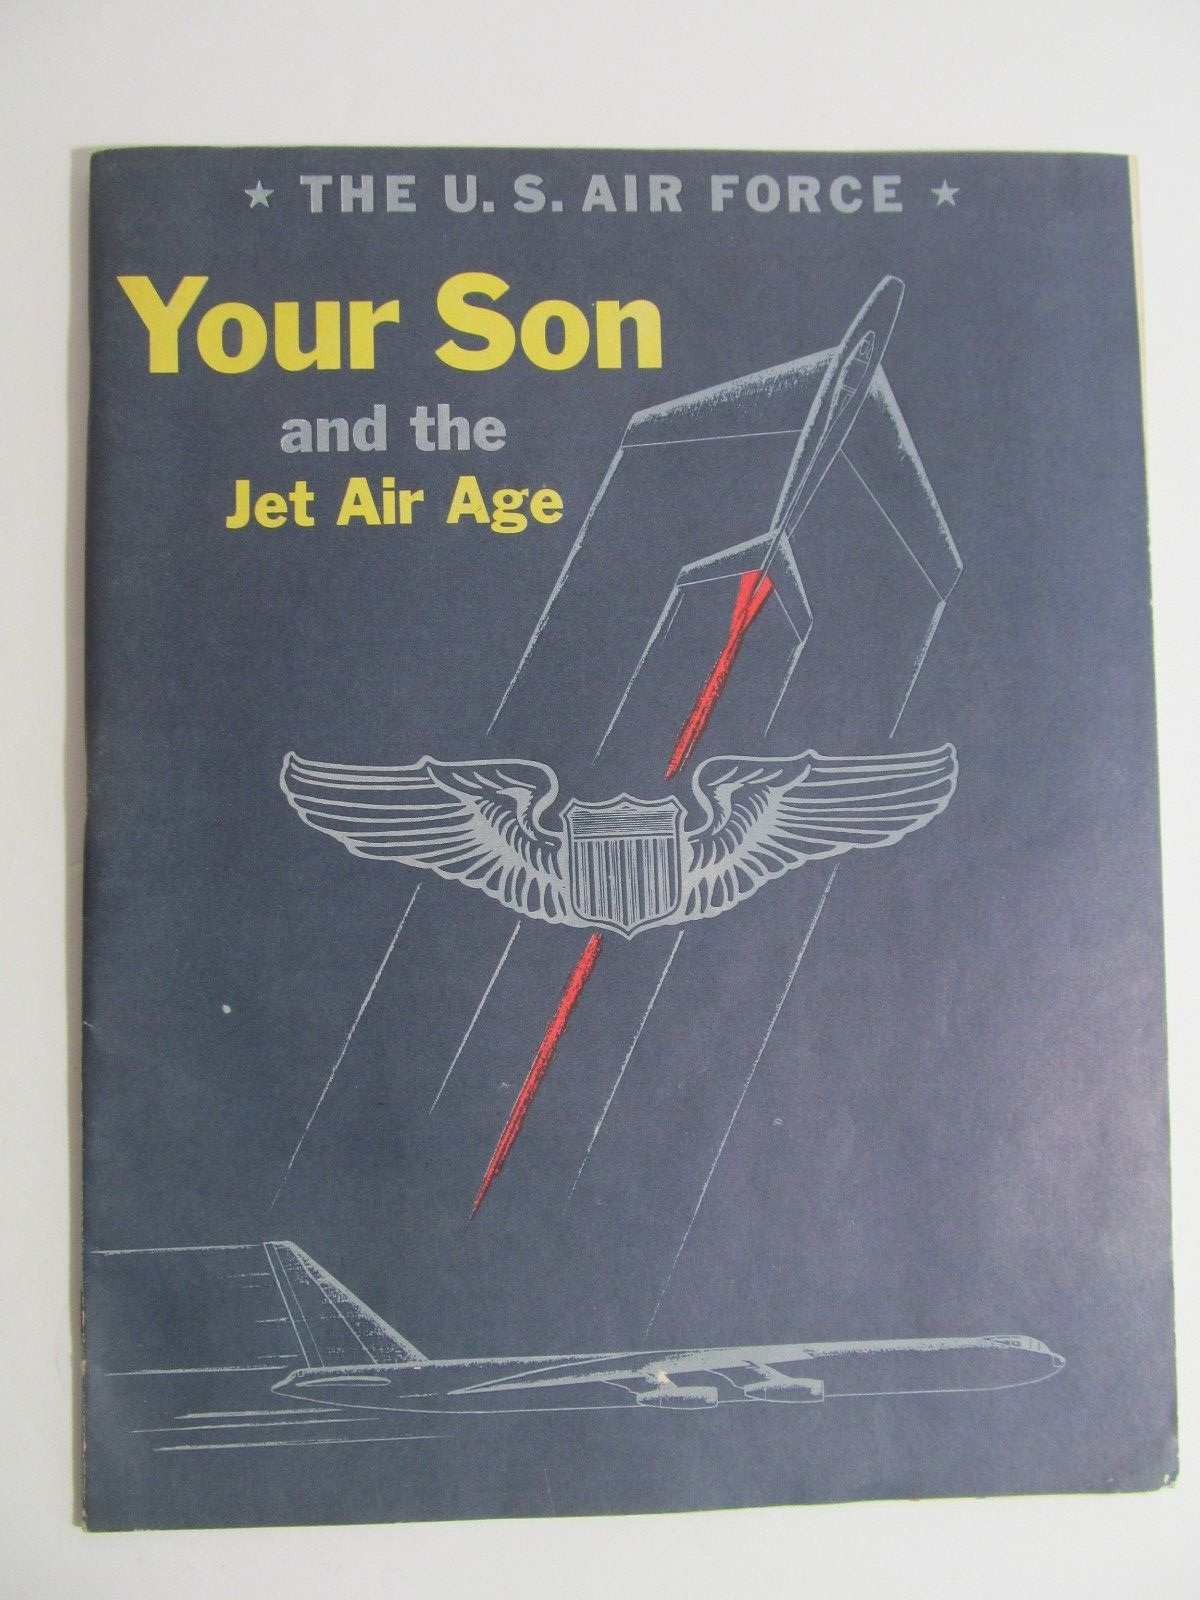 U.S. AIR FORCE YOUR SON AND THE JET AIR AGE RECRUITER BOOK 1954